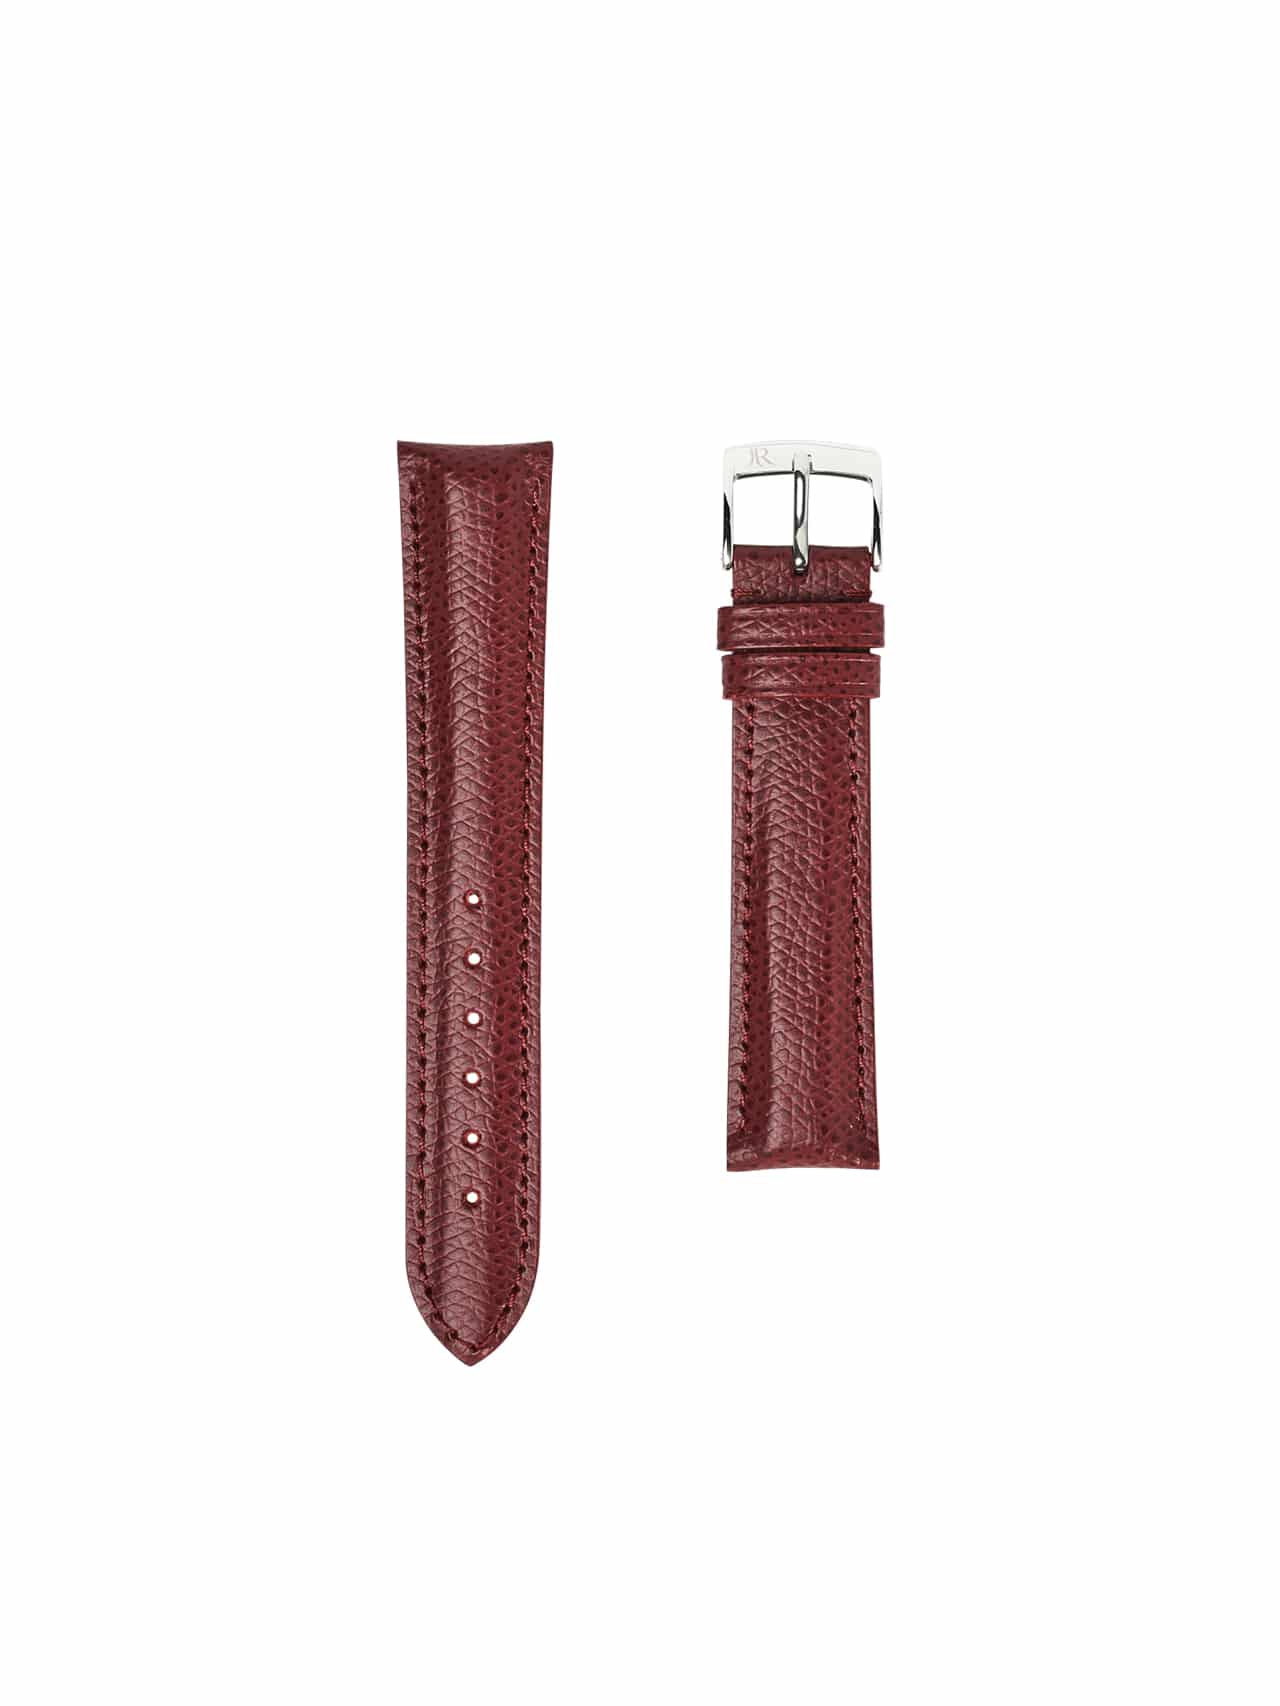 jean rousseau leather strap red black